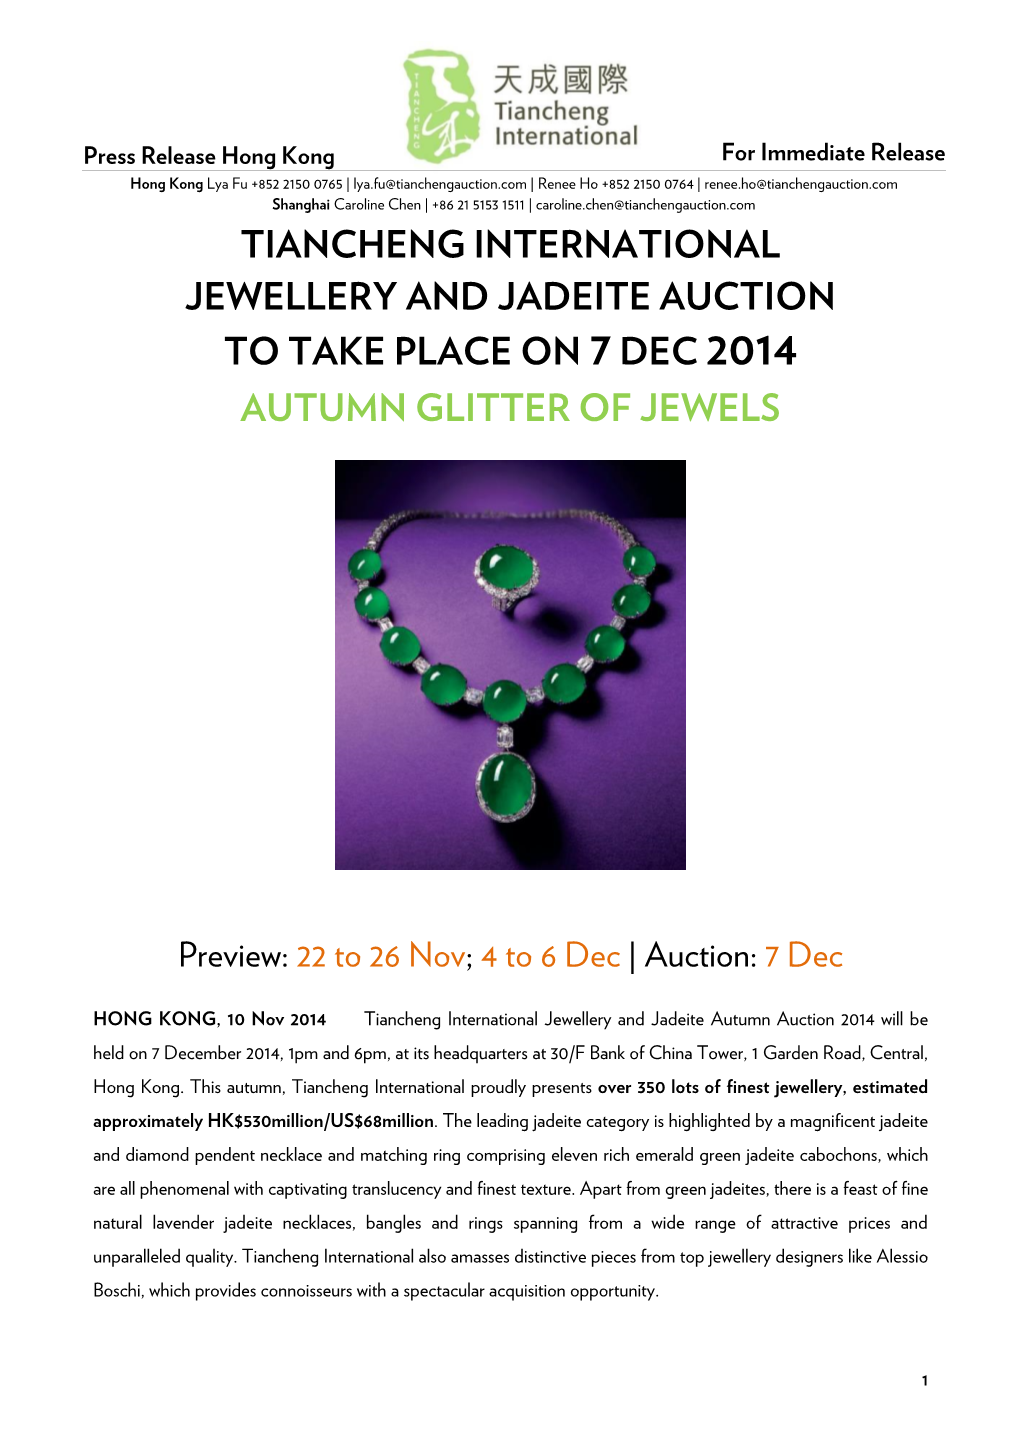 Tiancheng International Jewellery and Jadeite Auction to Take Place on 7 Dec 2014 Autumn Glitter of Jewels